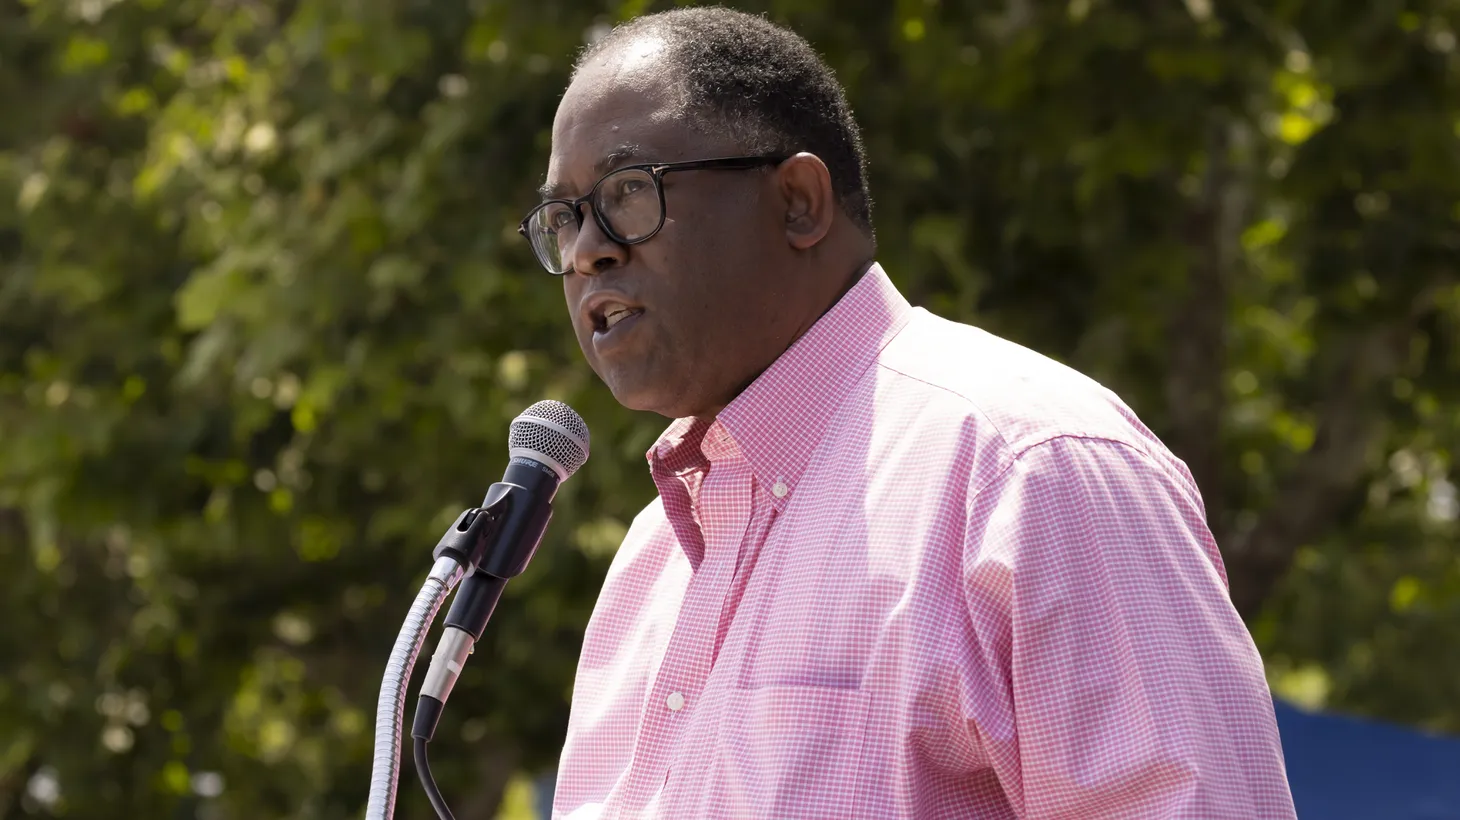 Mark Ridley-Thomas gives a speech during the first celebration of Juneteenth as a federal holiday at the re-opening of Leimert Park, Los Angeles, June 19, 2021.